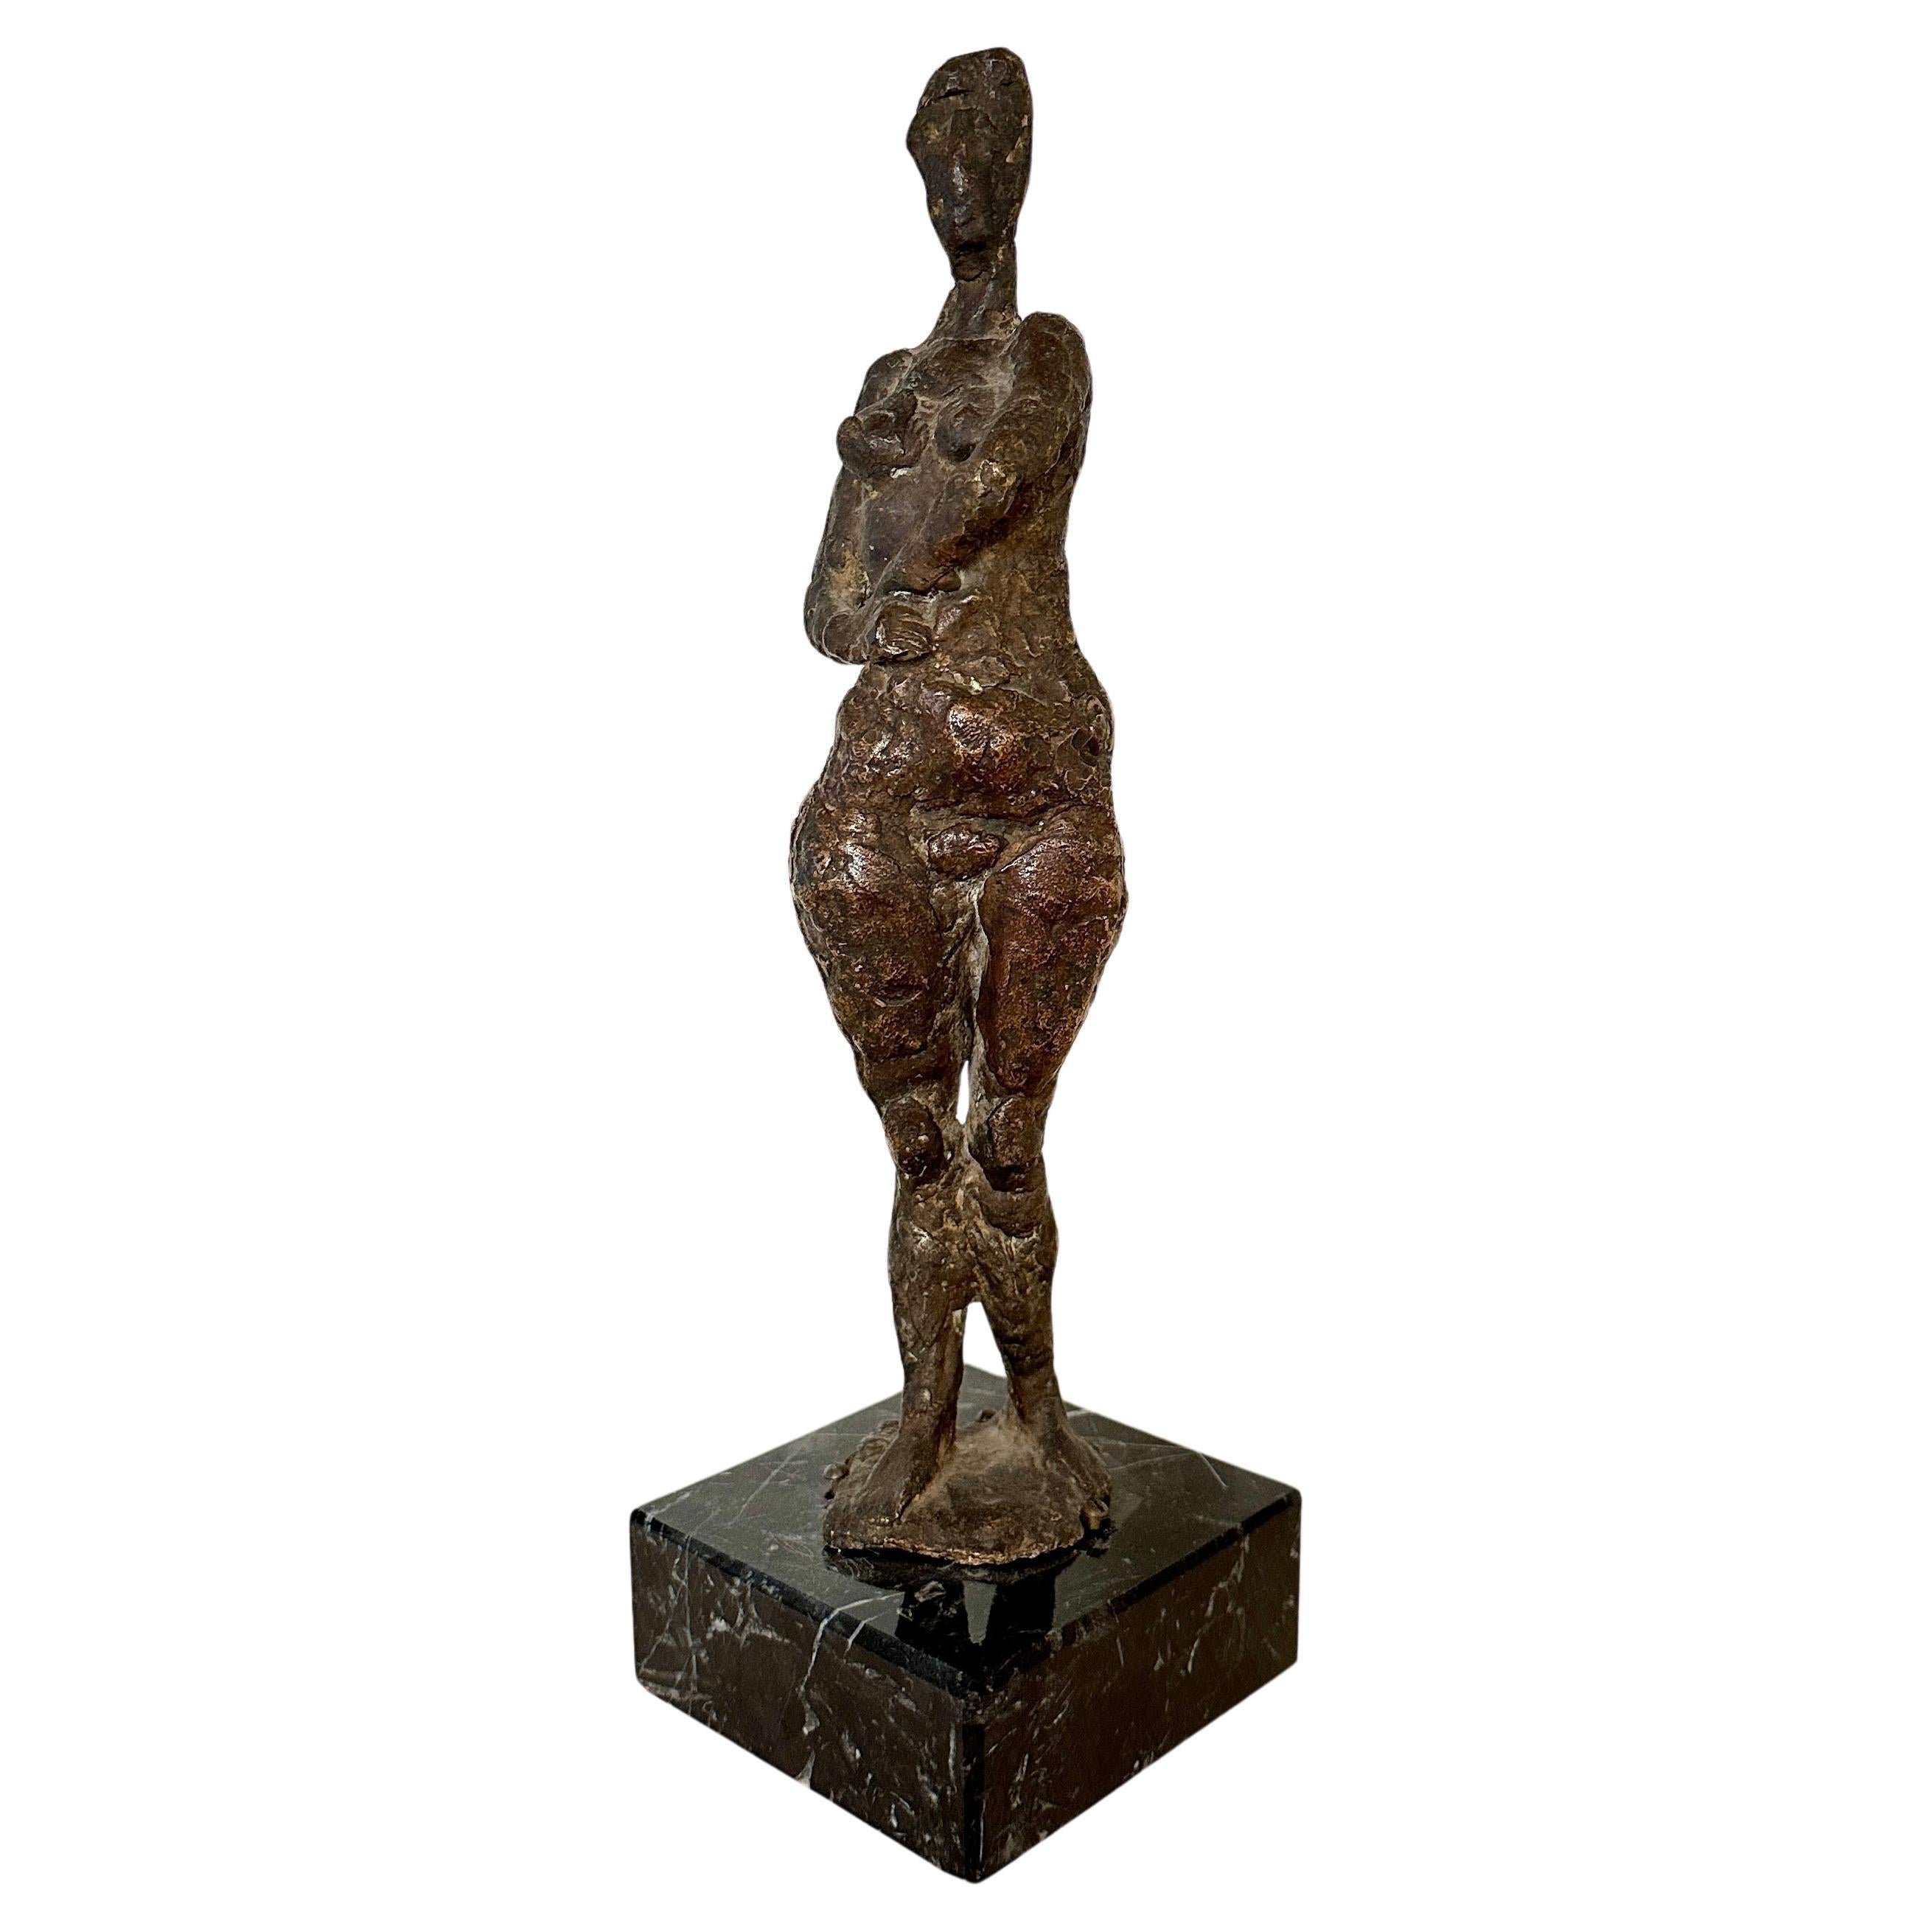 Small Cast Bronze Woman Sculpture by Oskar Bottoli on a Black Marble Stand, 1969 For Sale